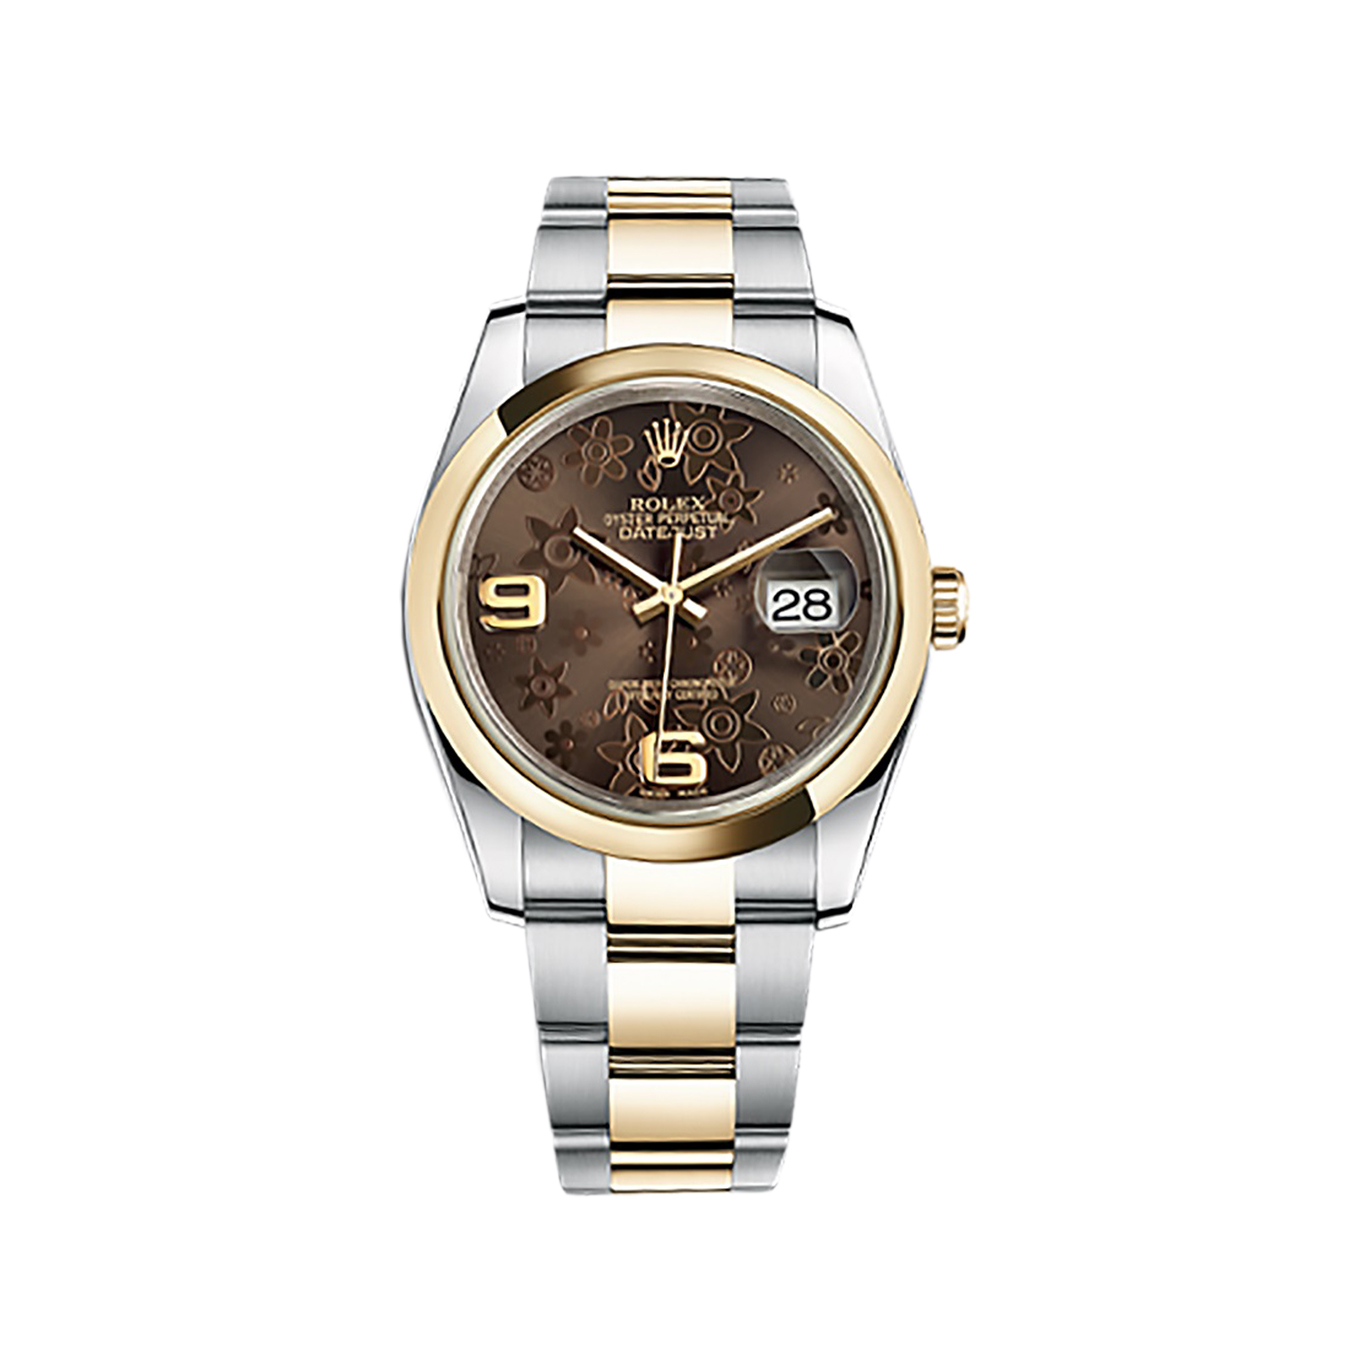 Datejust 36 116203 Gold & Stainless Steel Watch (Bronze Floral Motif)